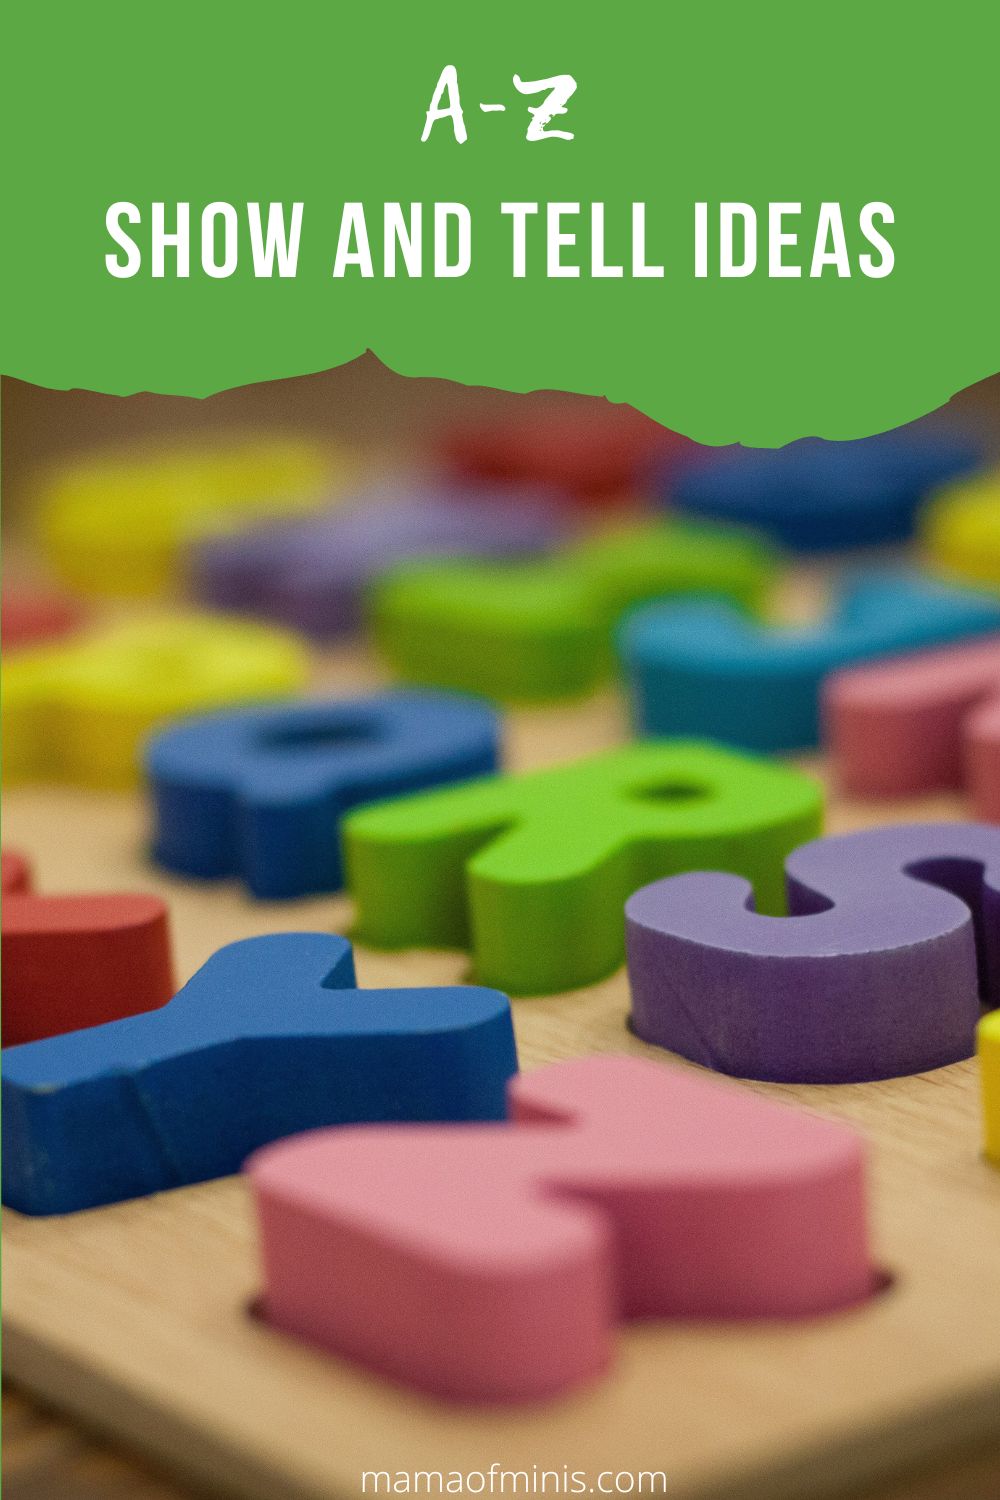 A-Z Show and tell Ideas by the letter